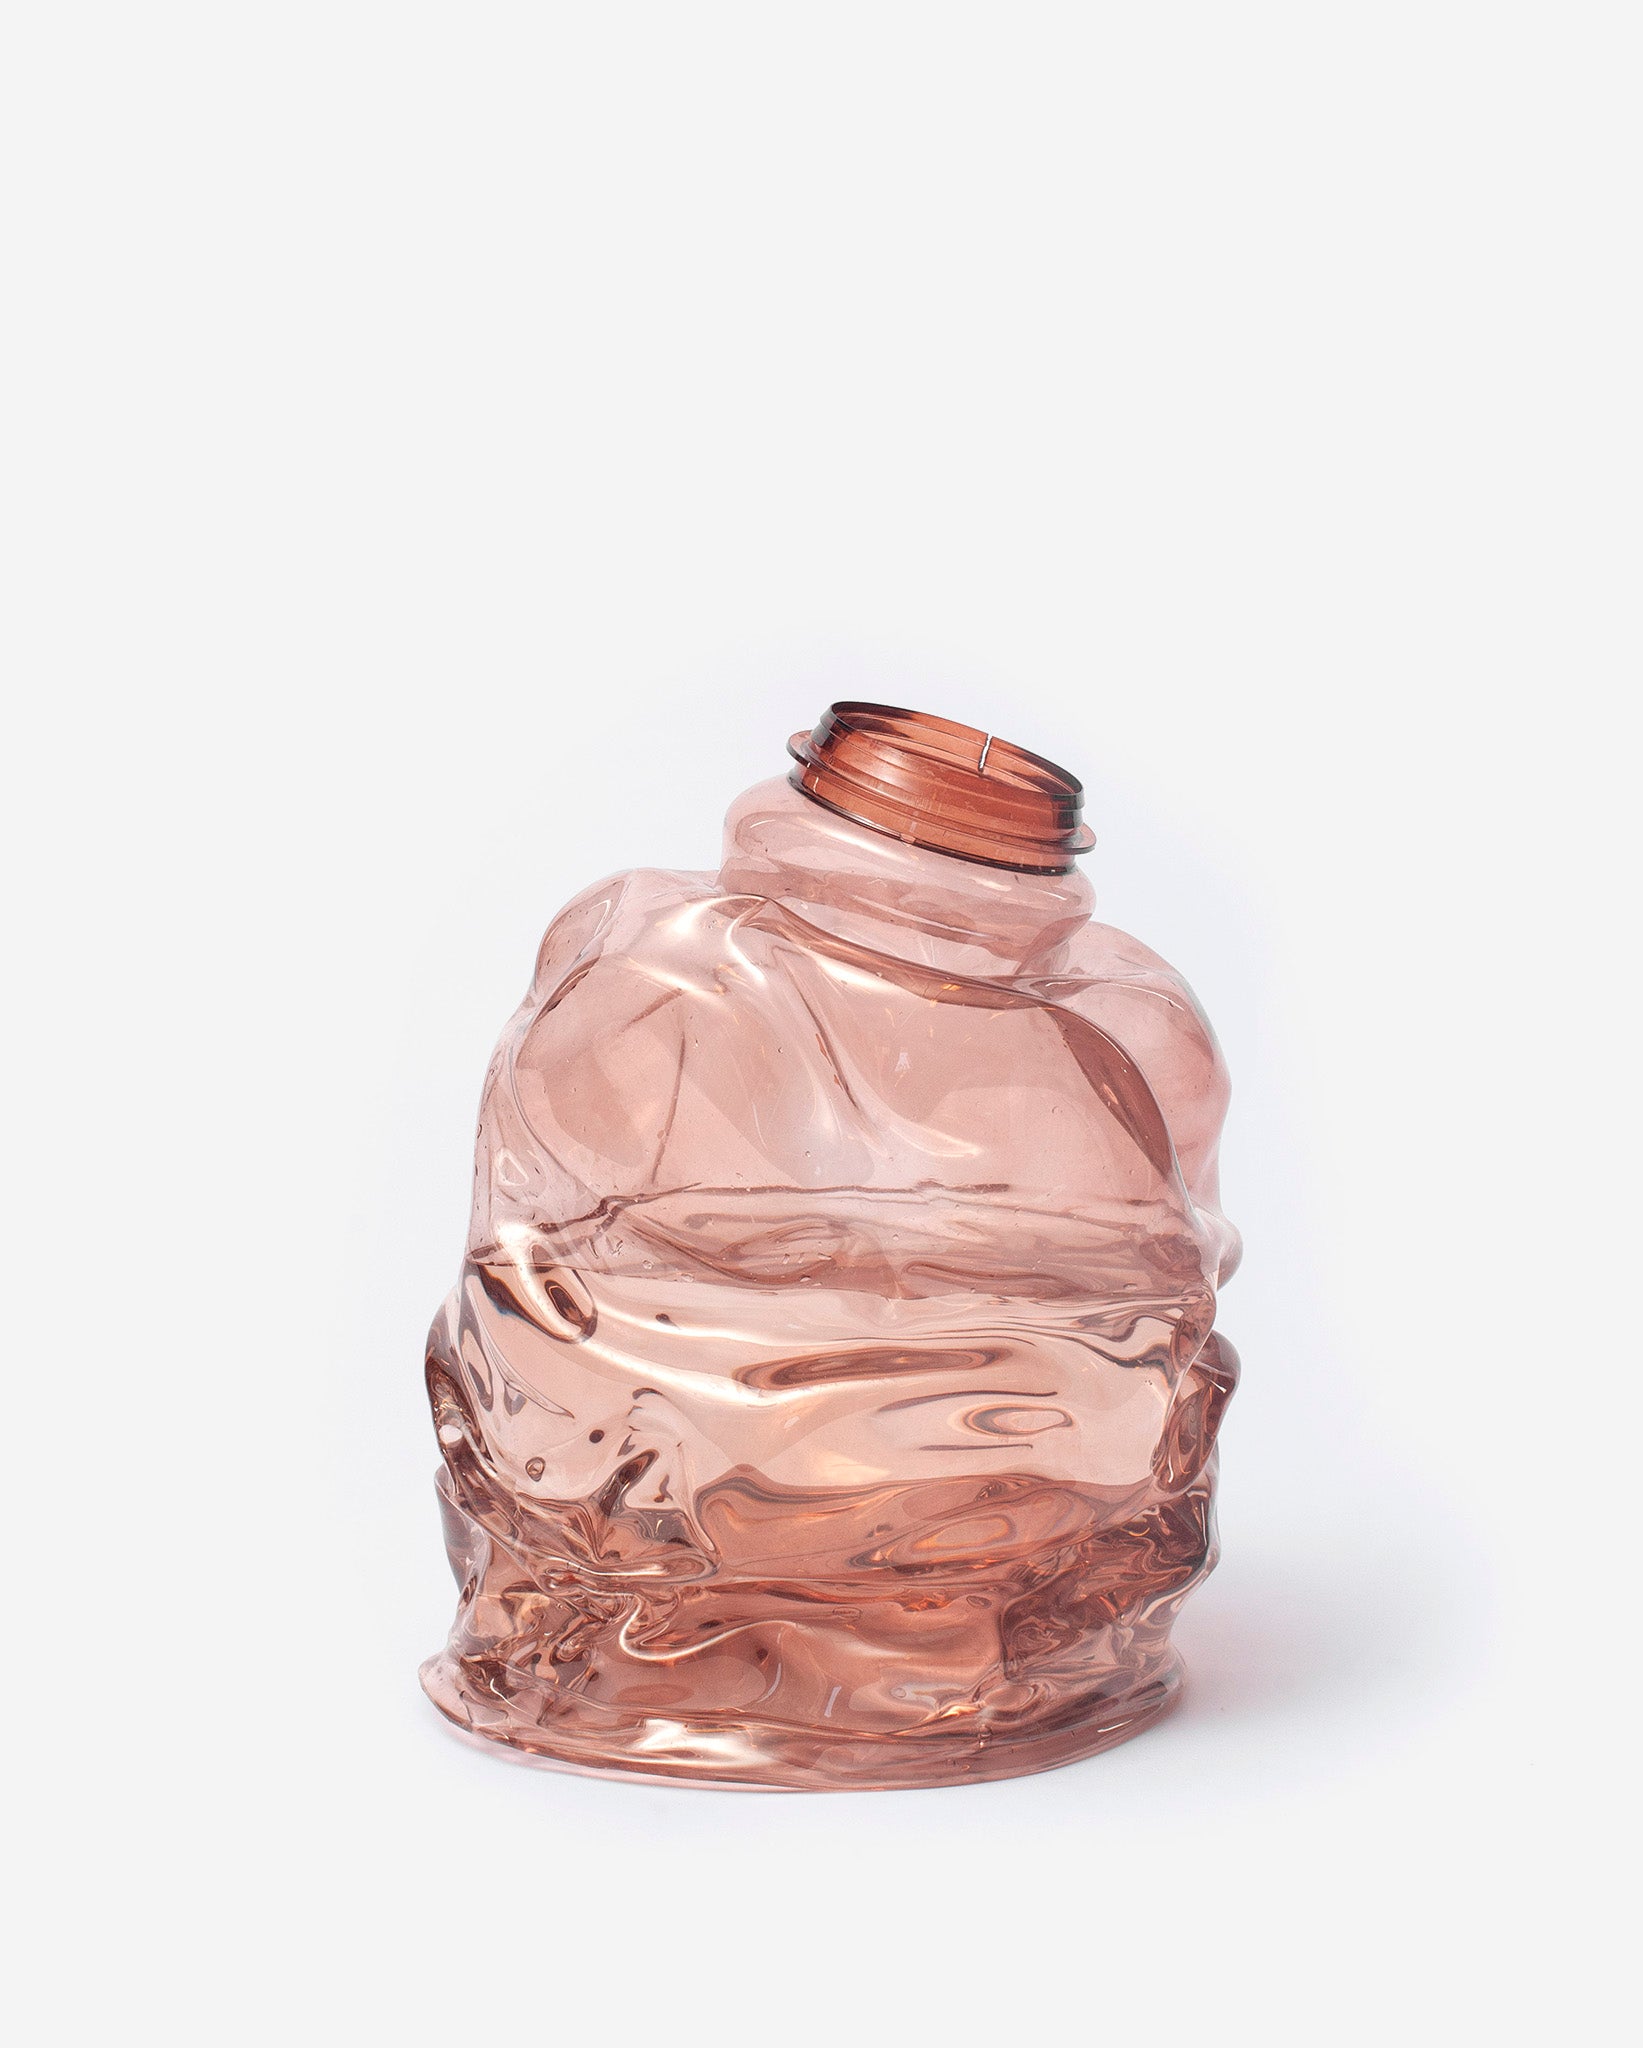 Small brown handmade recycled plastic vase on a white background